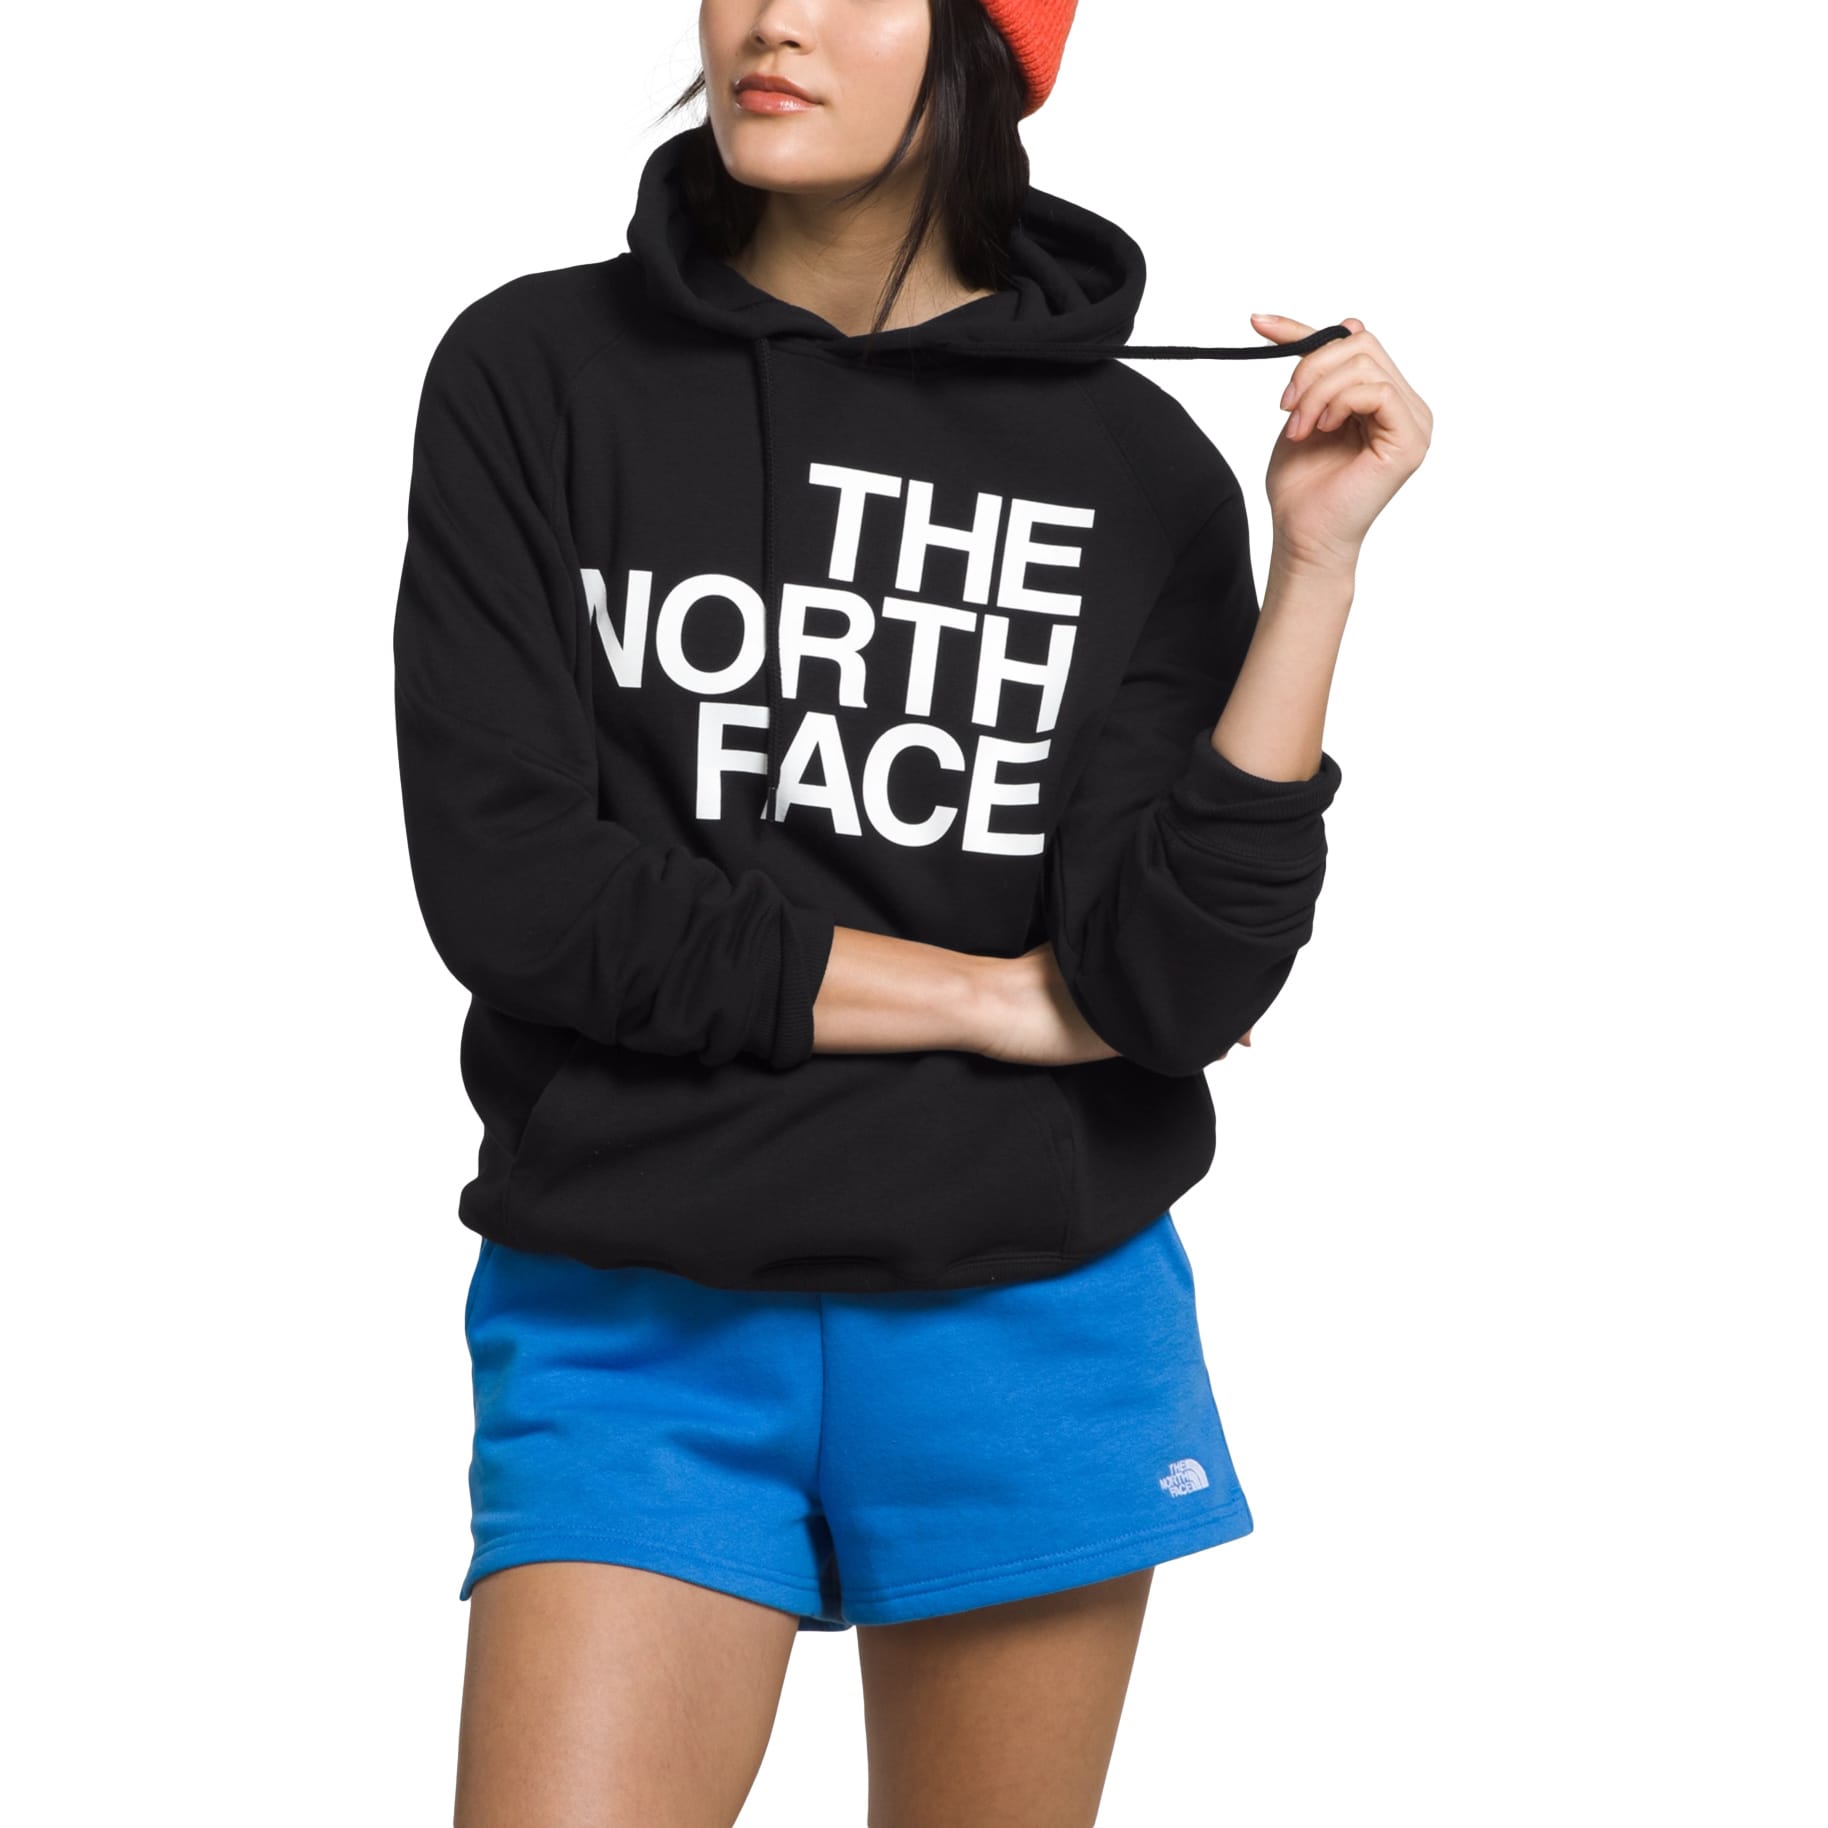 The North Face® Women’s Brand Proud Hoodie